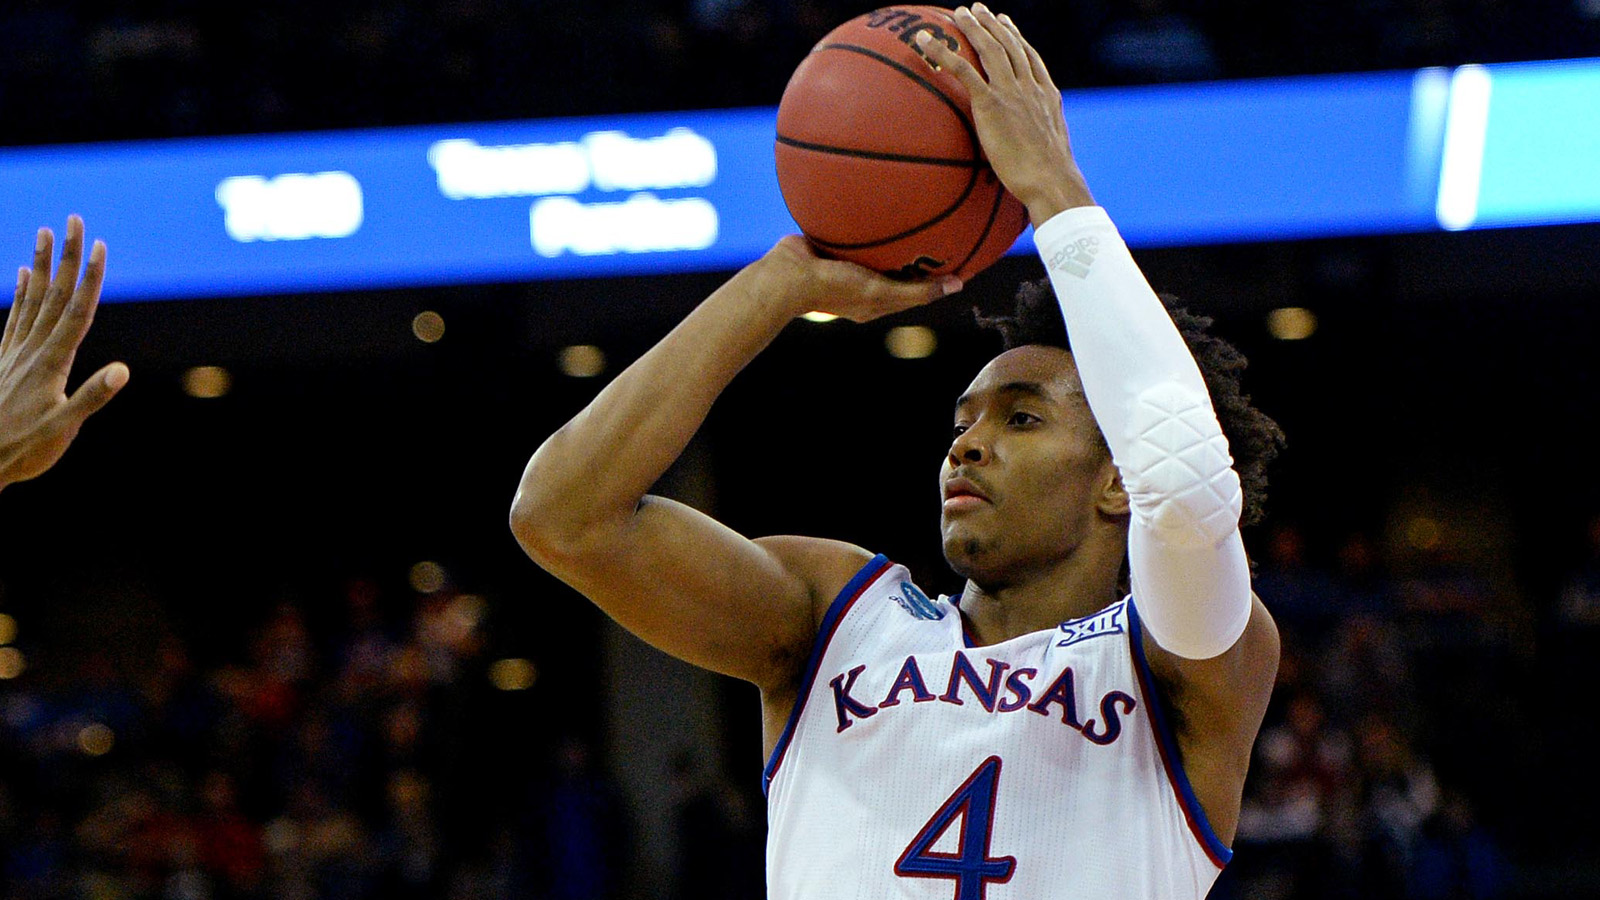 Jayhawks will need to be consistent from beyond the arc against Blue Devils